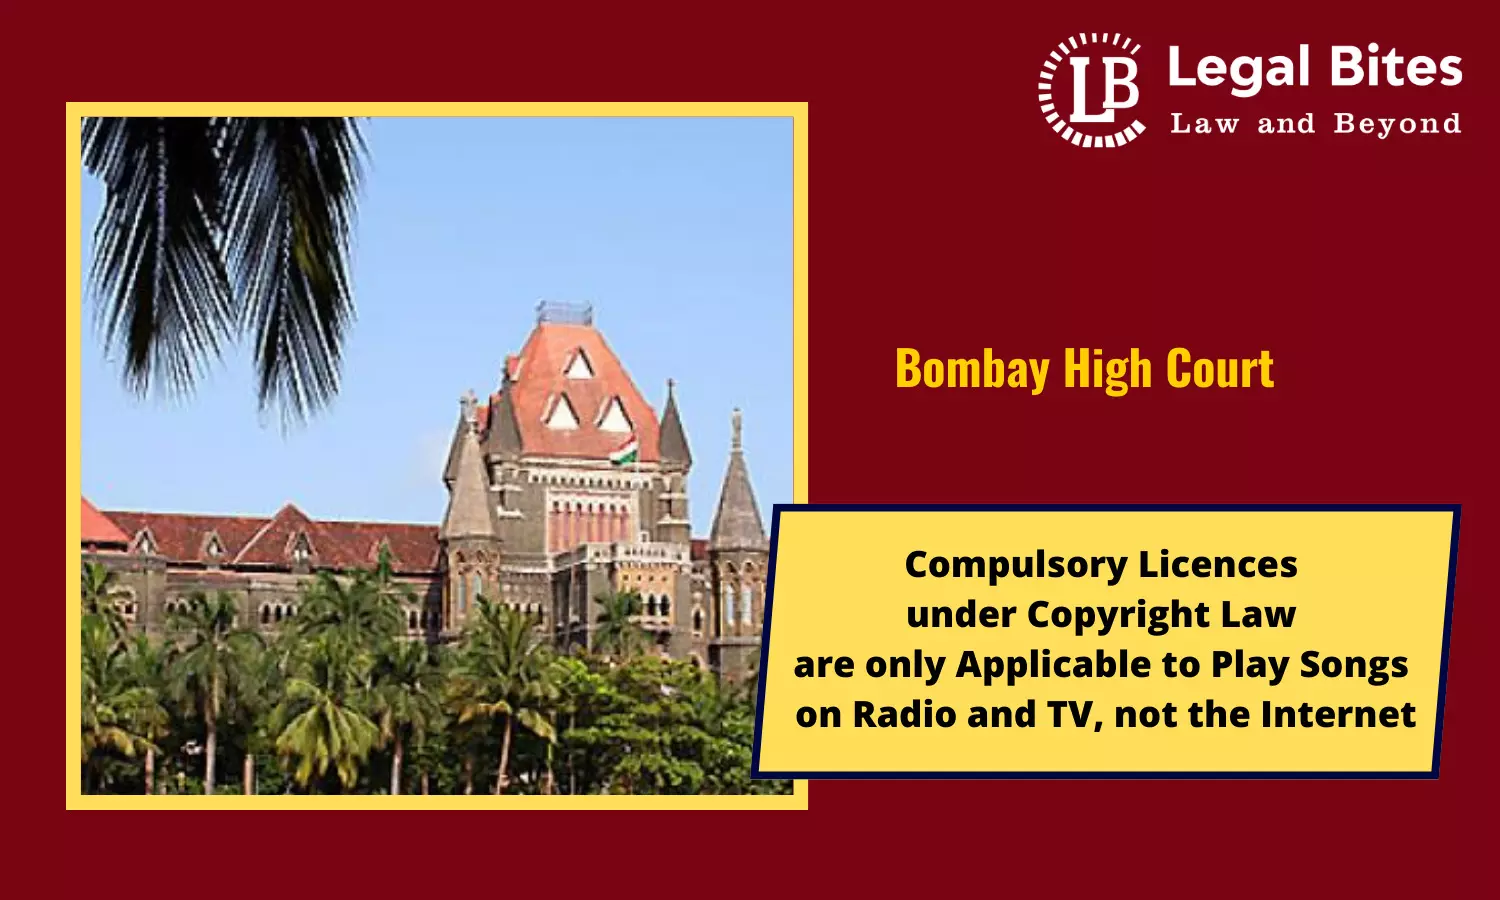 Compulsory Licences under Copyright Law are only Applicable to Play Songs on Radio and TV, not the Internet: Bombay High Court